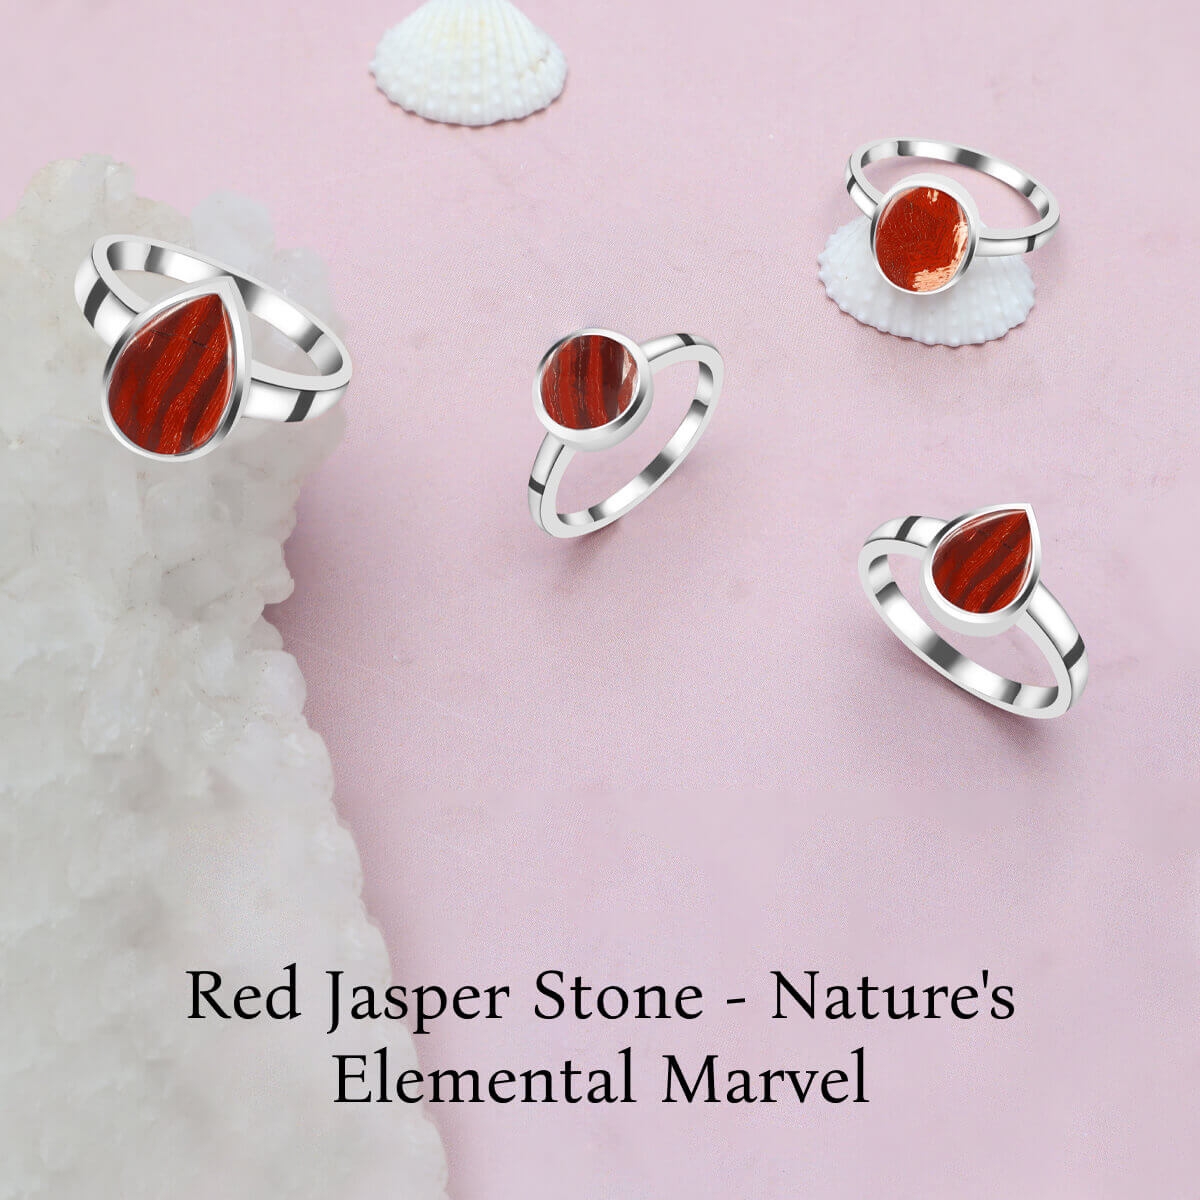 Physical Properties of Red Jasper Stone